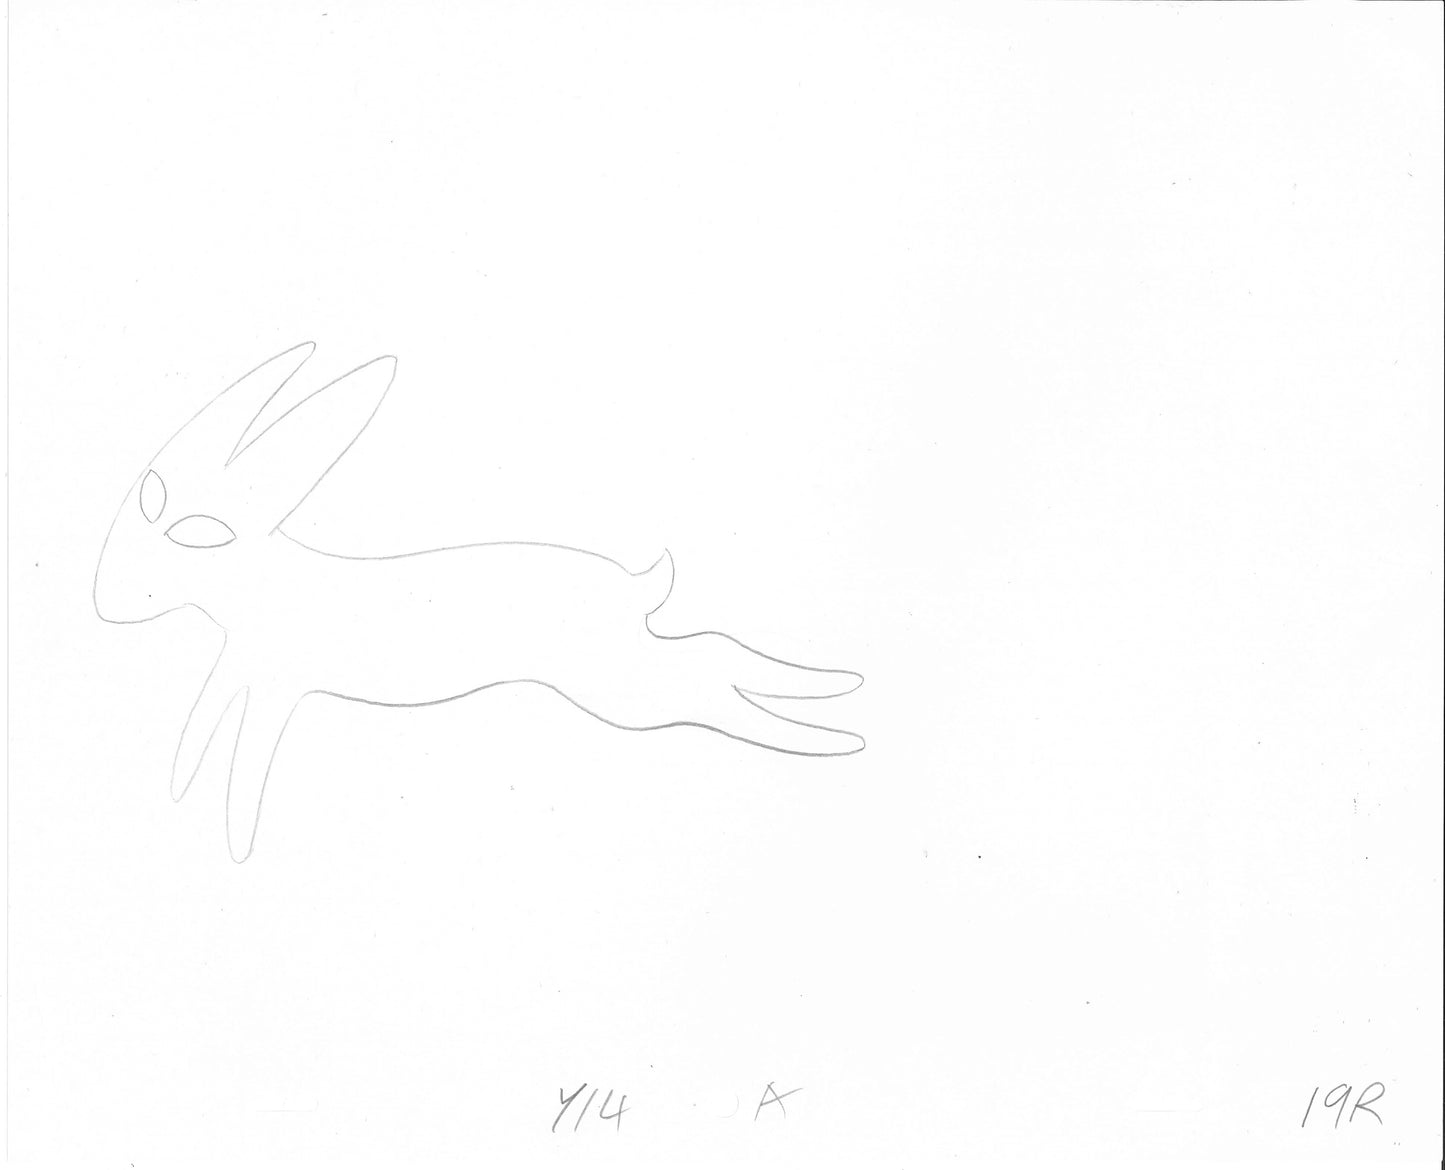 Watership Down Black Rabbit Inle 1978 Production Animation Cel Drawing with Linda Jones Enterprise Seal n Certificate of Authenticity BR9